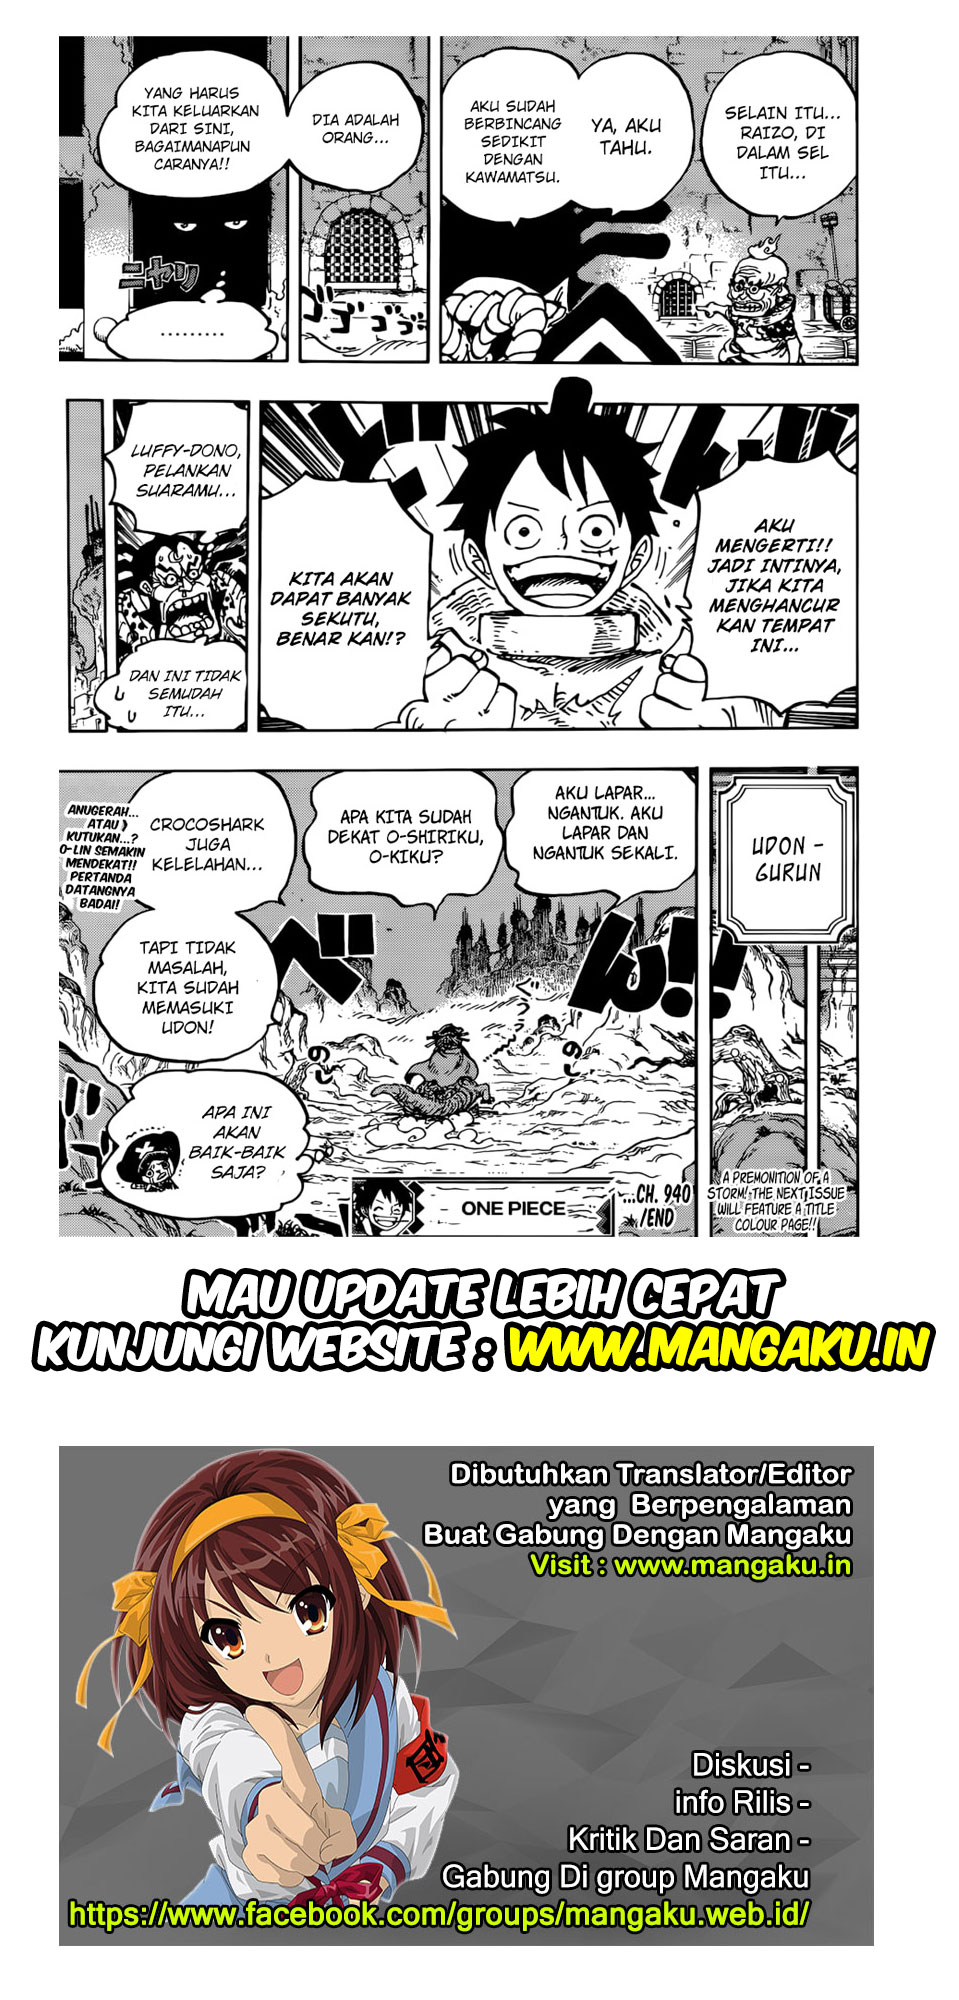 One Piece Chapter 940 Image 17